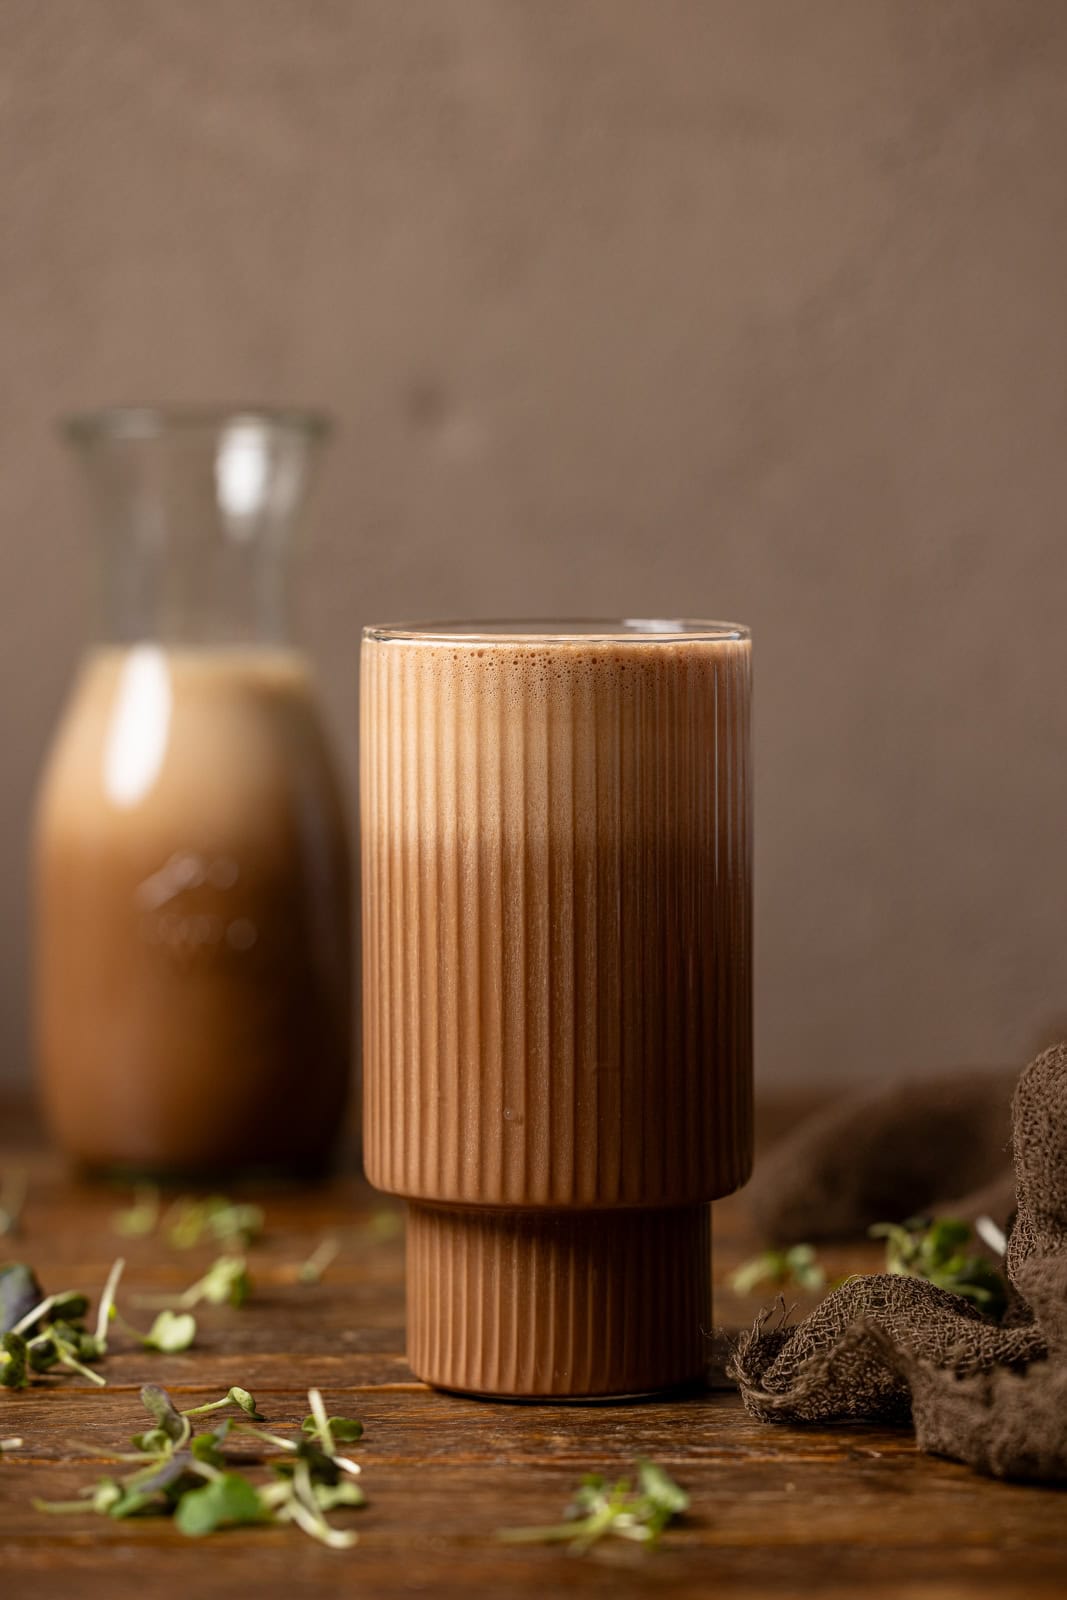 Chocolate milk in a glass and jar on a brown wood table.